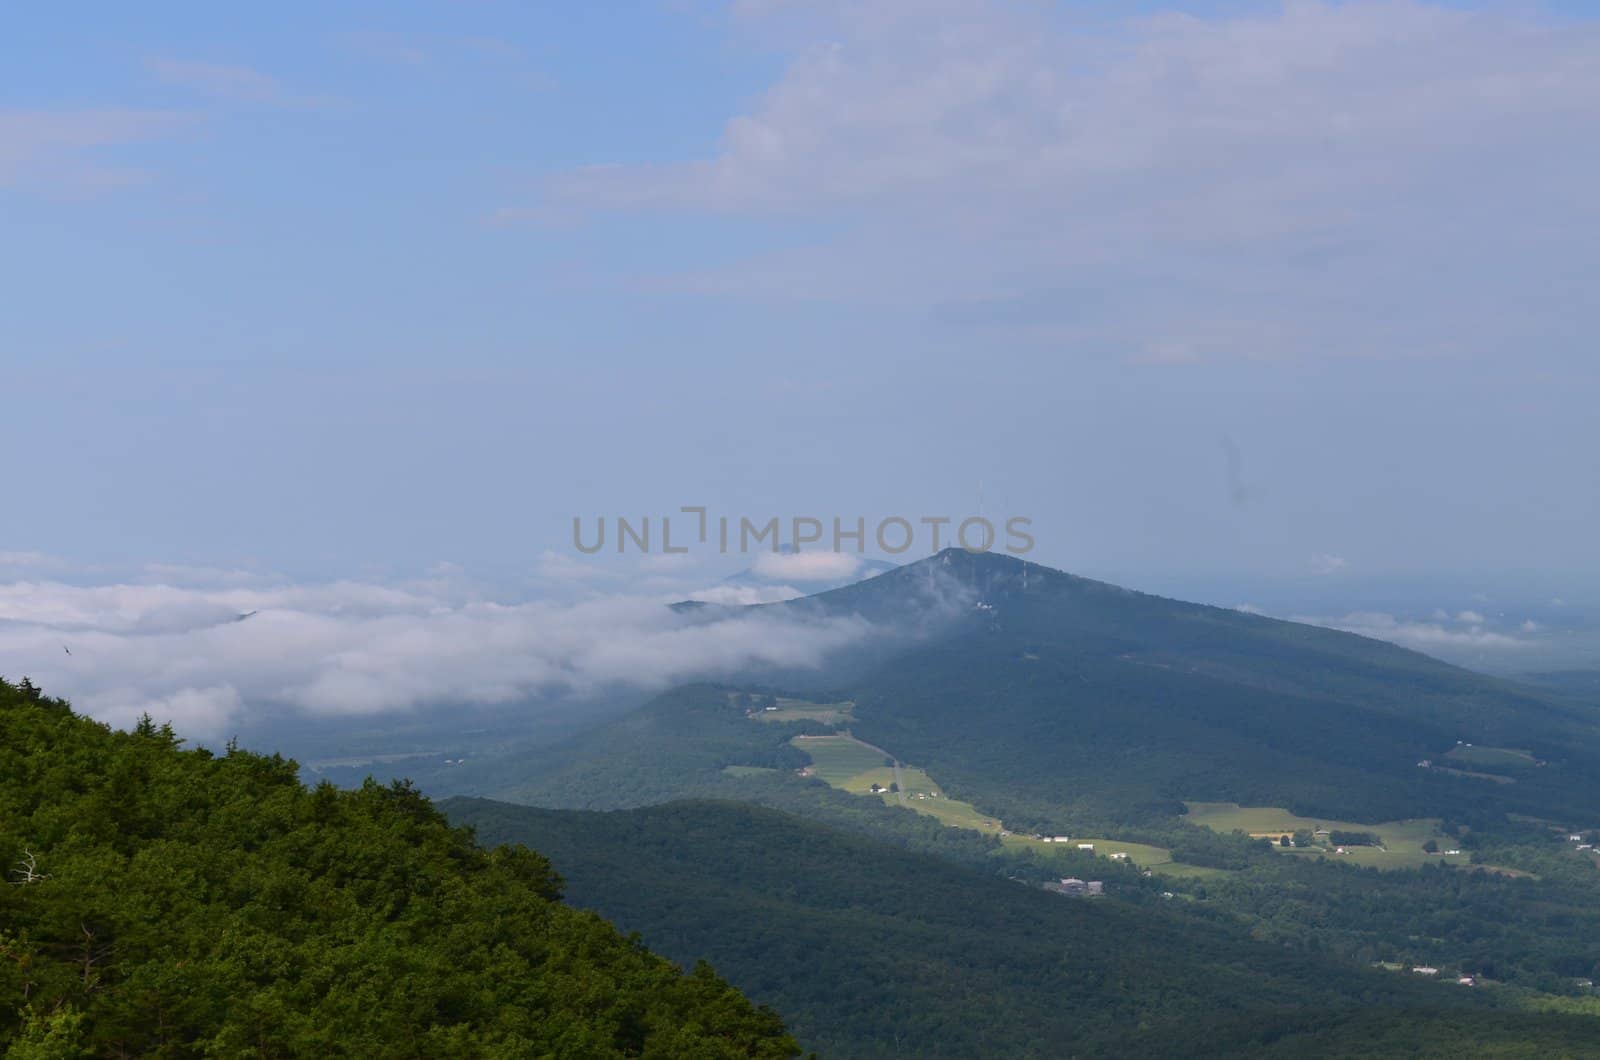 View from the peaks at Hanging Rock State Park in North Carolina